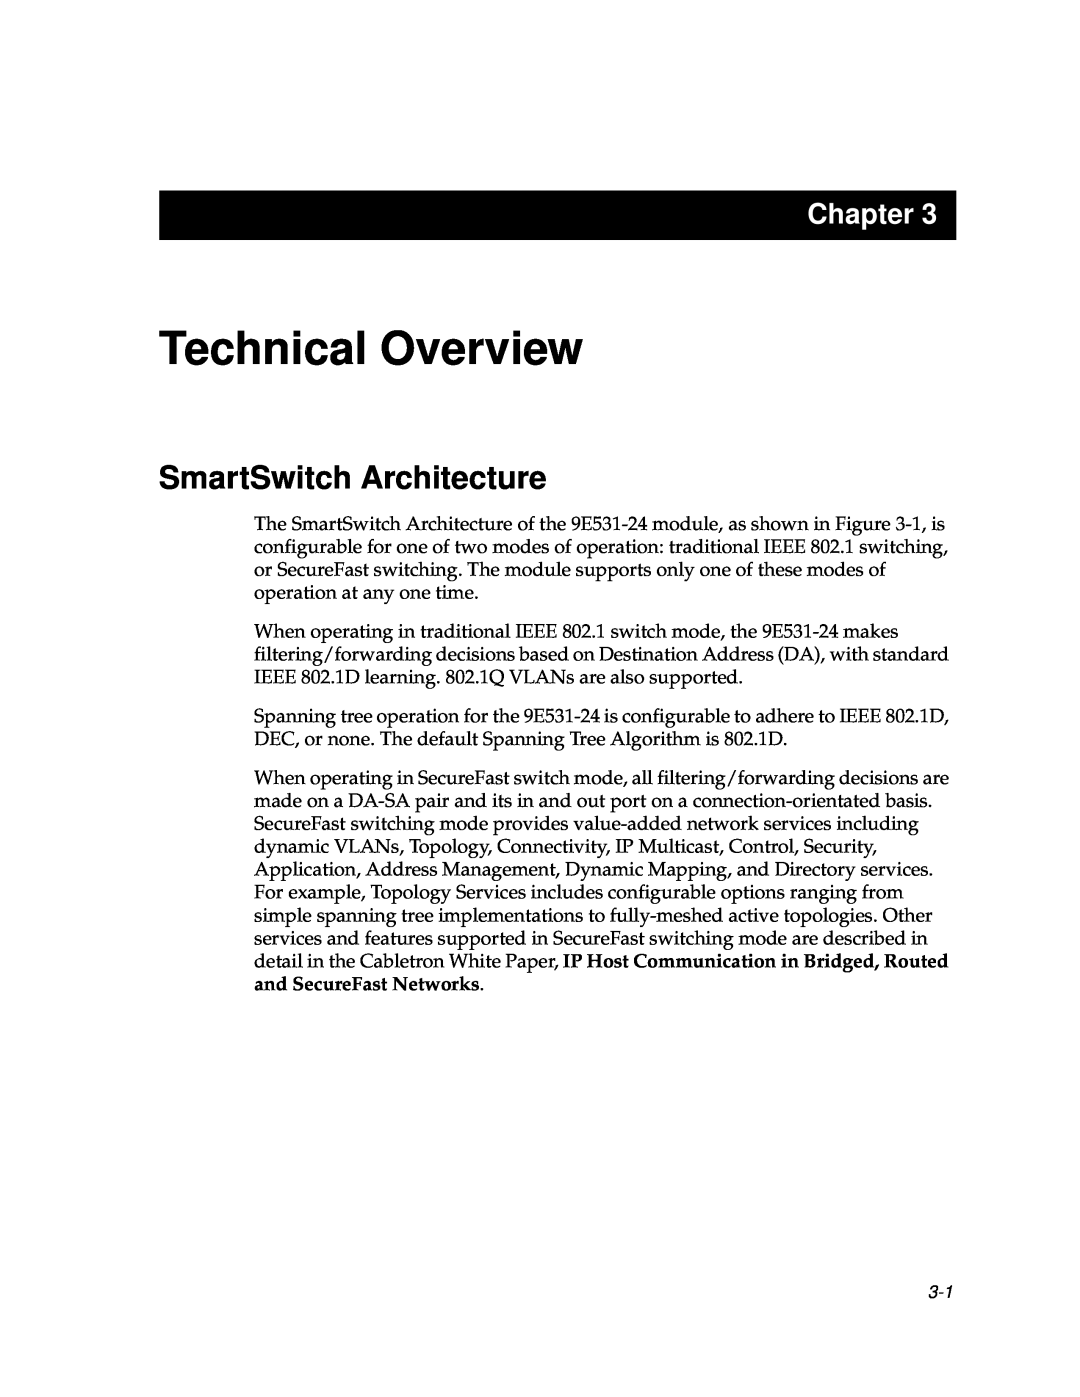 Cabletron Systems 9F120-08, 9F122-12, 9F125-0 manual Technical Overview, SmartSwitch Architecture, Chapter 